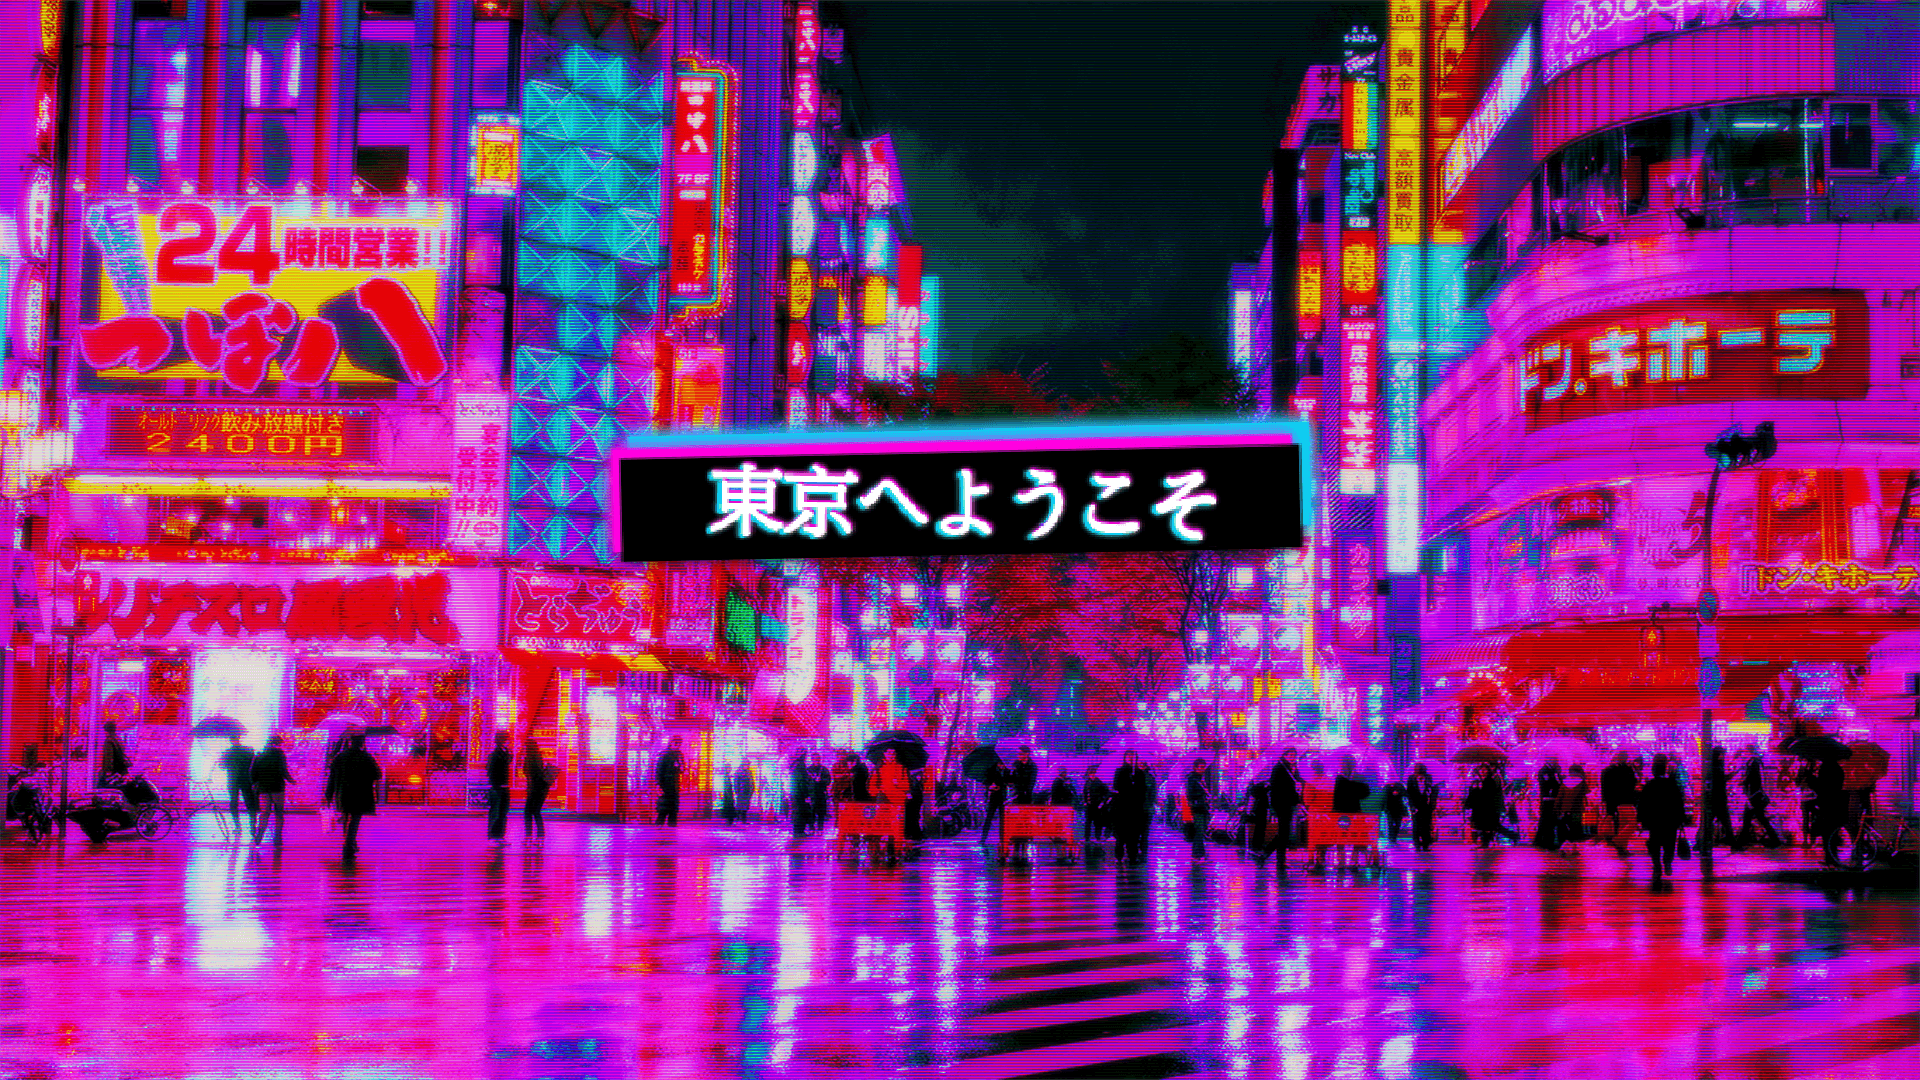 Aesthetic cyberpunk wallpaper with anime pink aesthetic and cyberpunk elements. - Tokyo